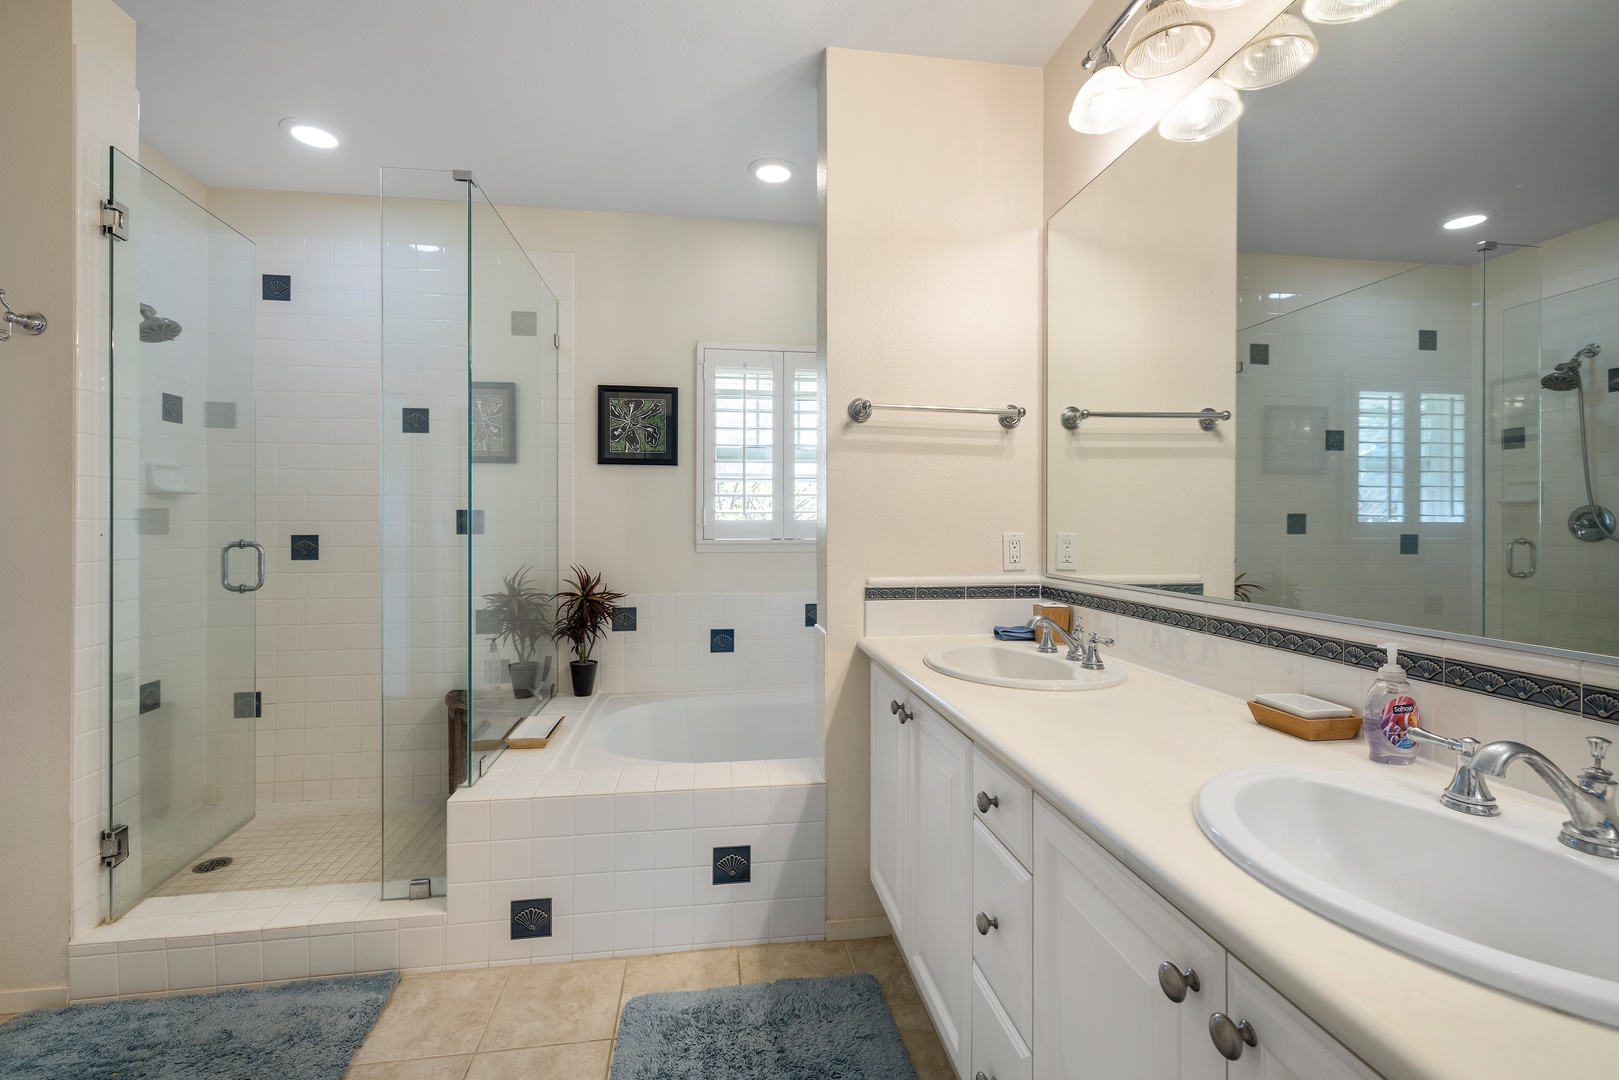 Kapolei Vacation Rentals, Coconut Plantation 1190-1 - The primary guest bathroom with a soaking tub and double vanity.